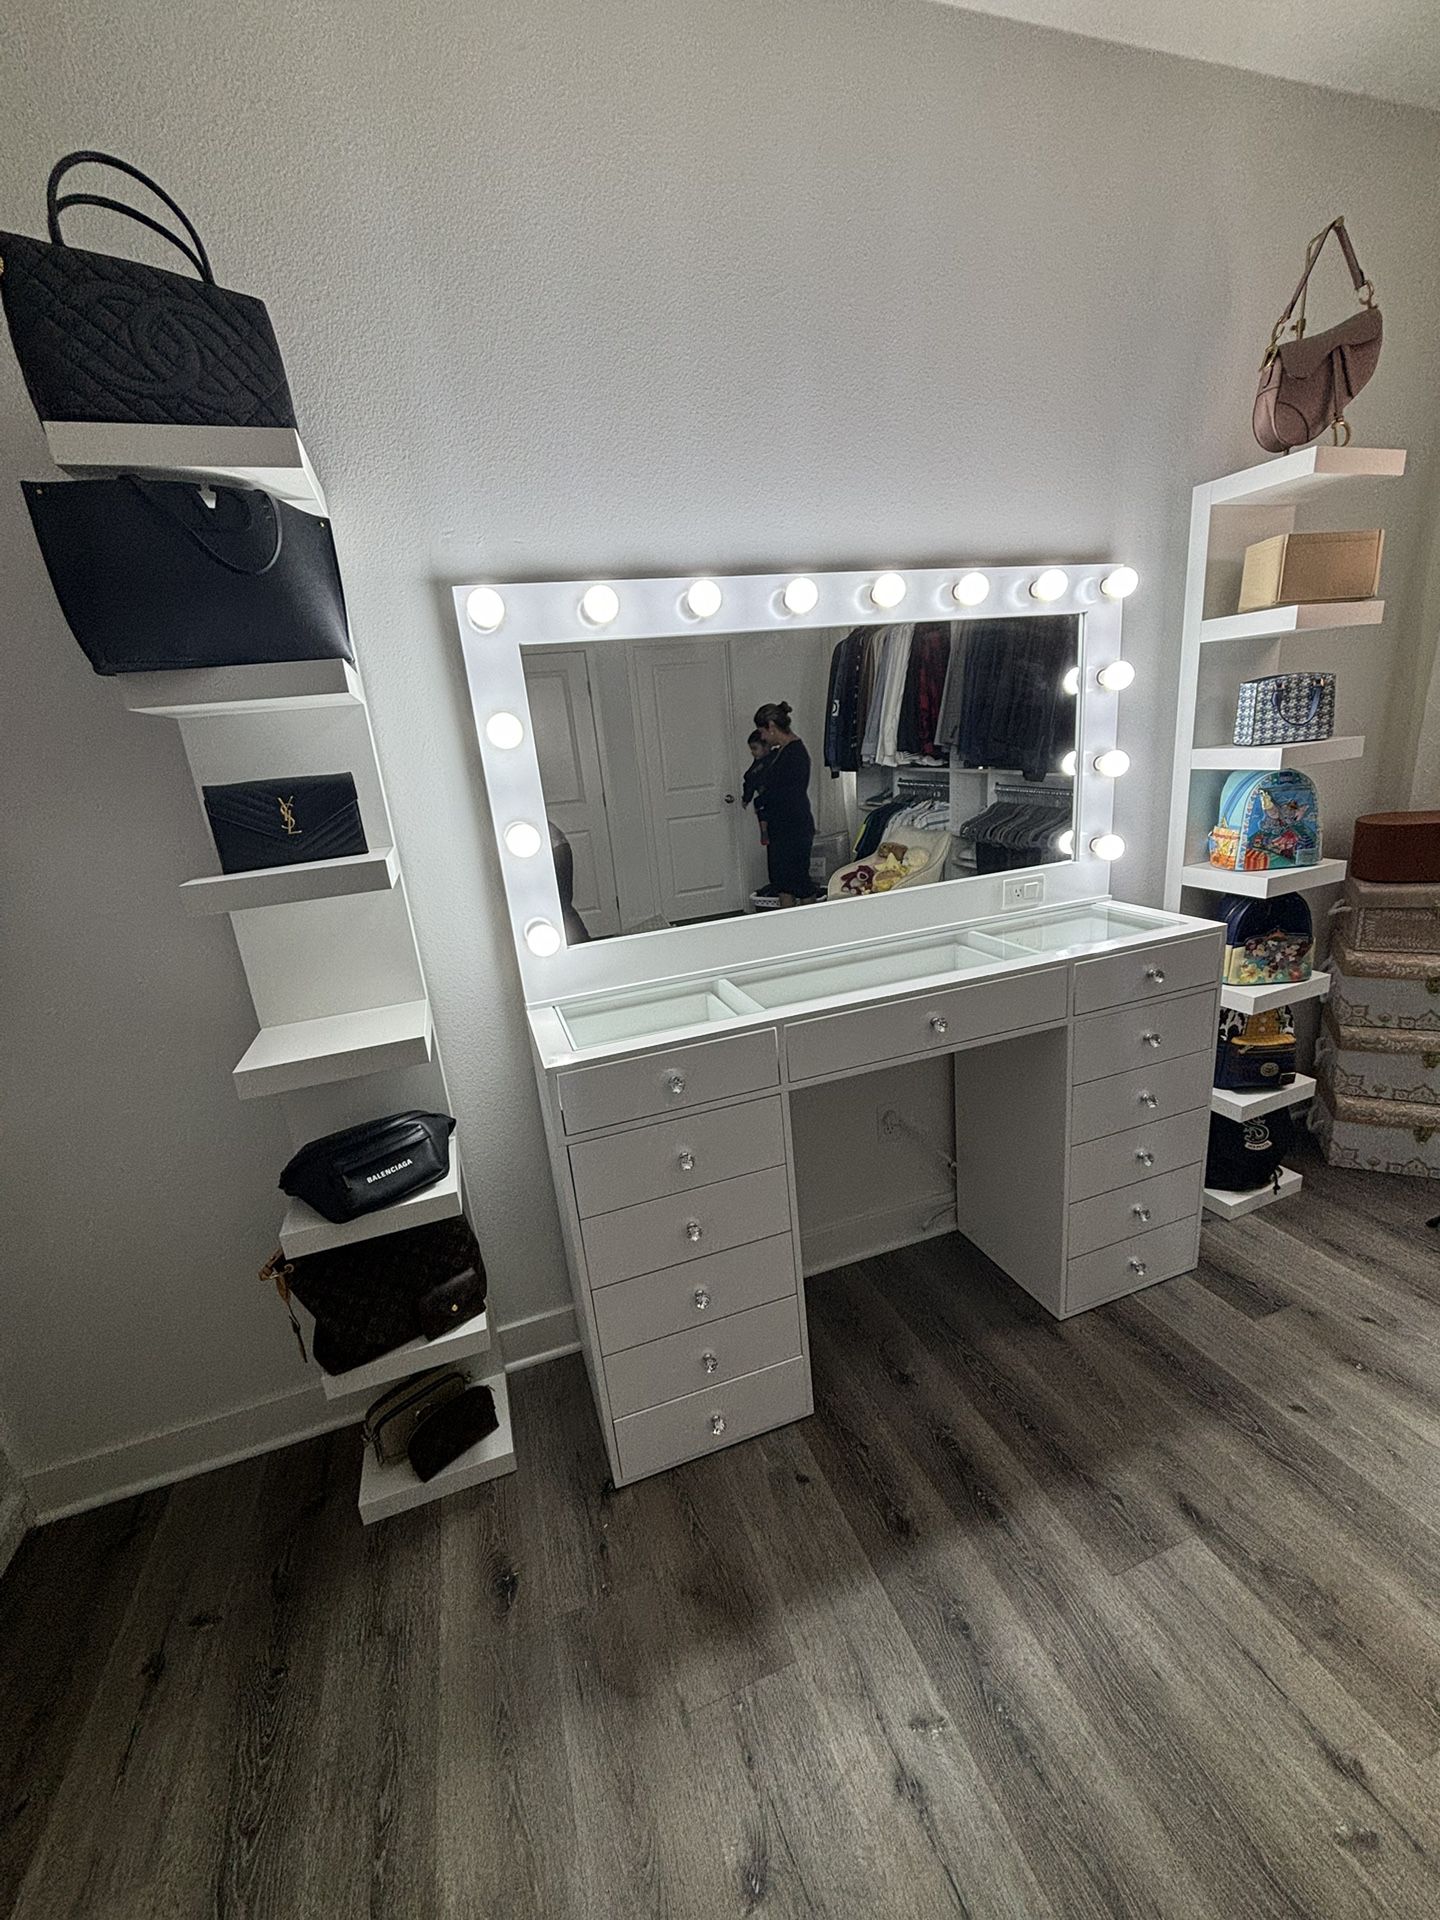 New 60in Vanity With Mirror❤️